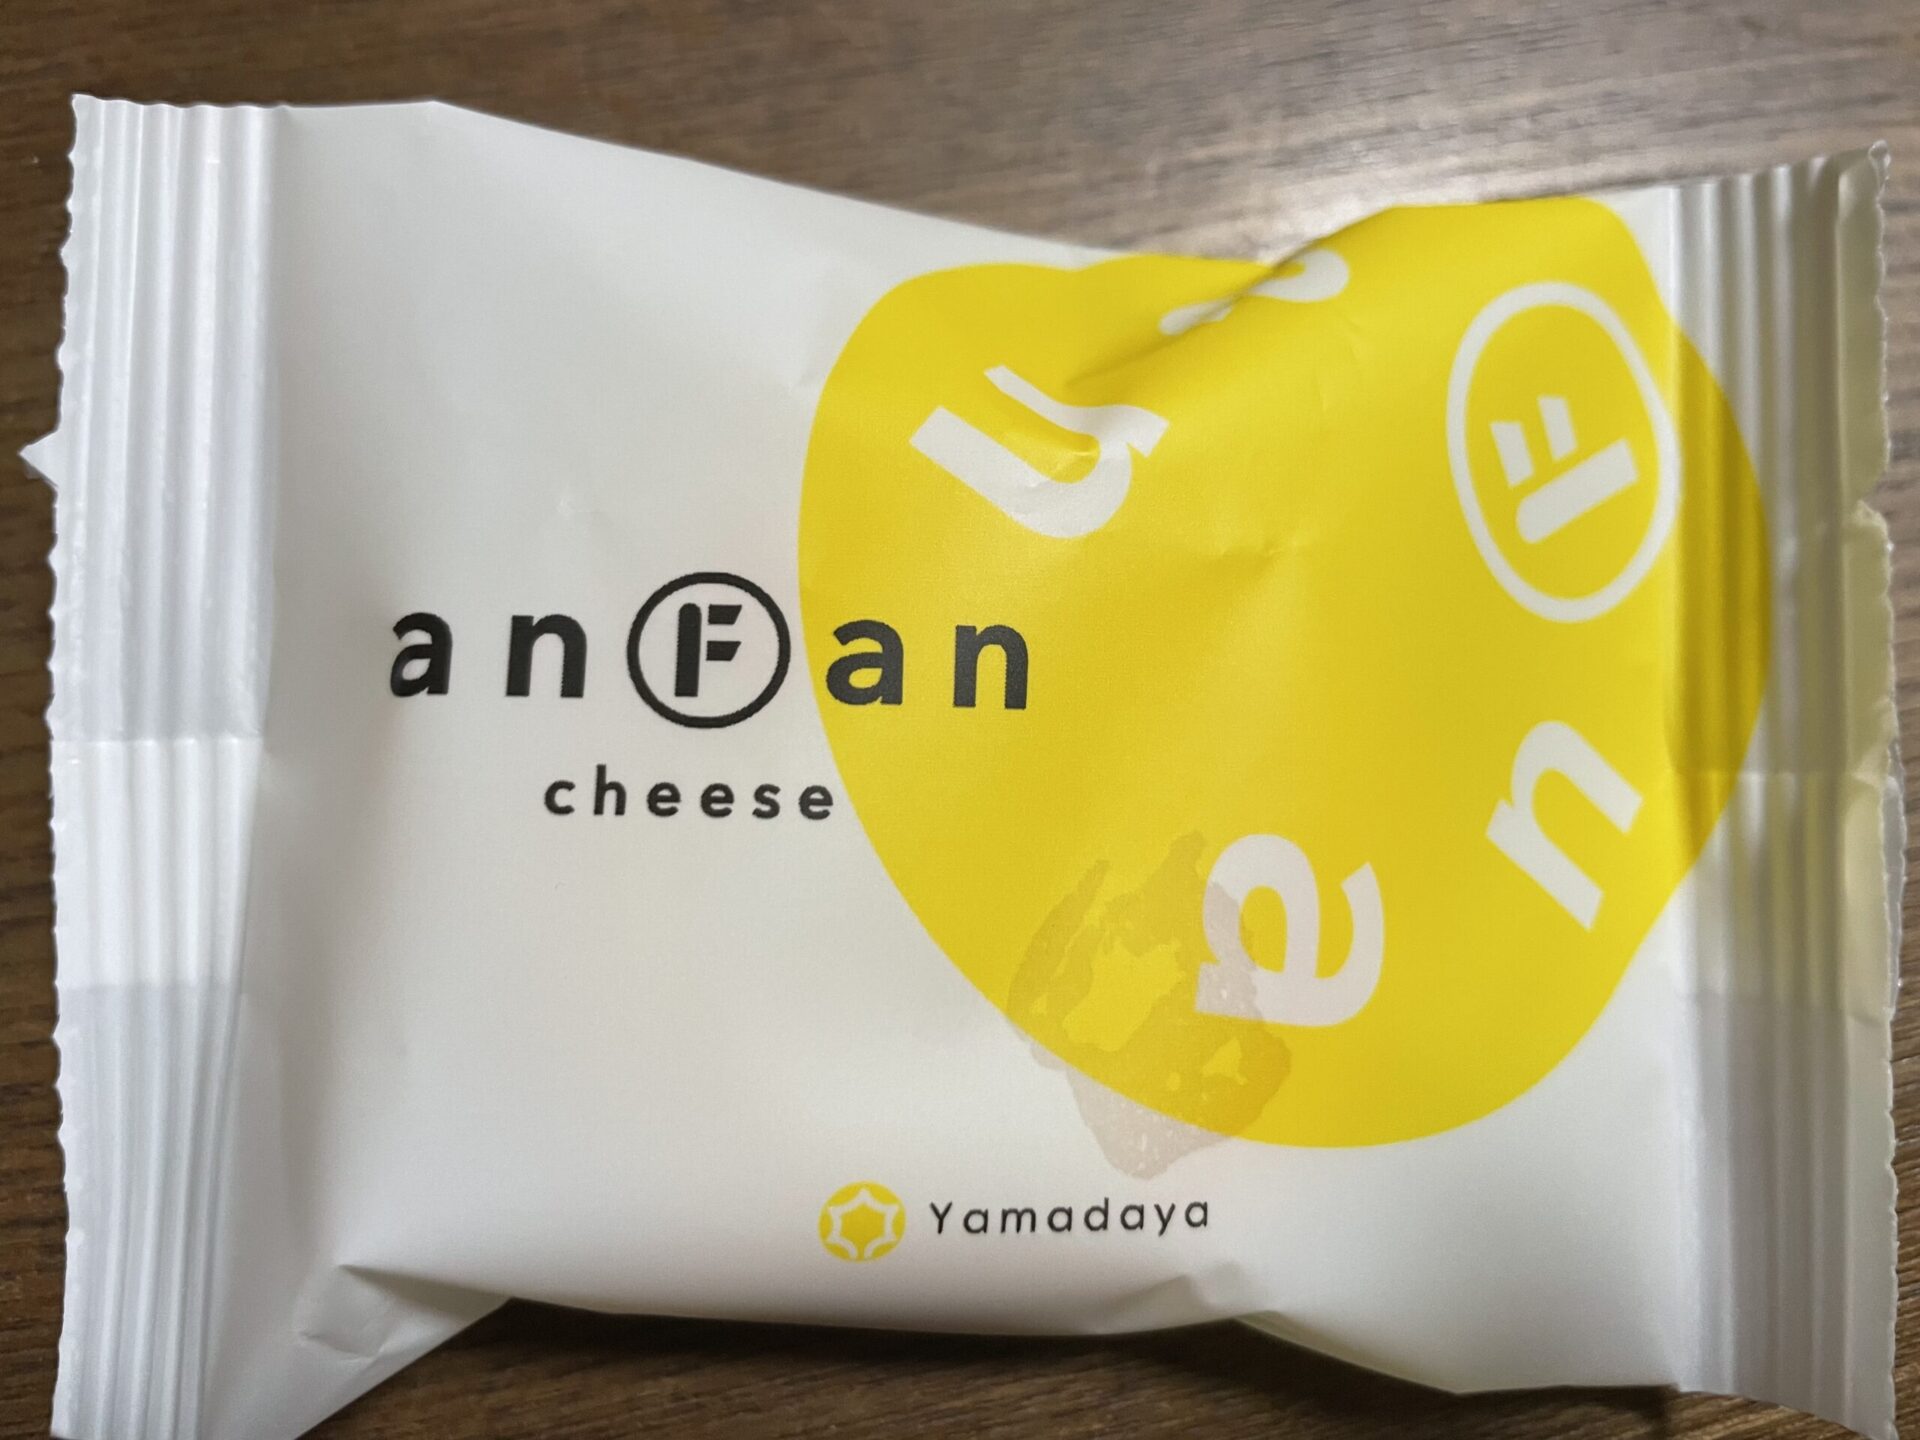 anFan cheese